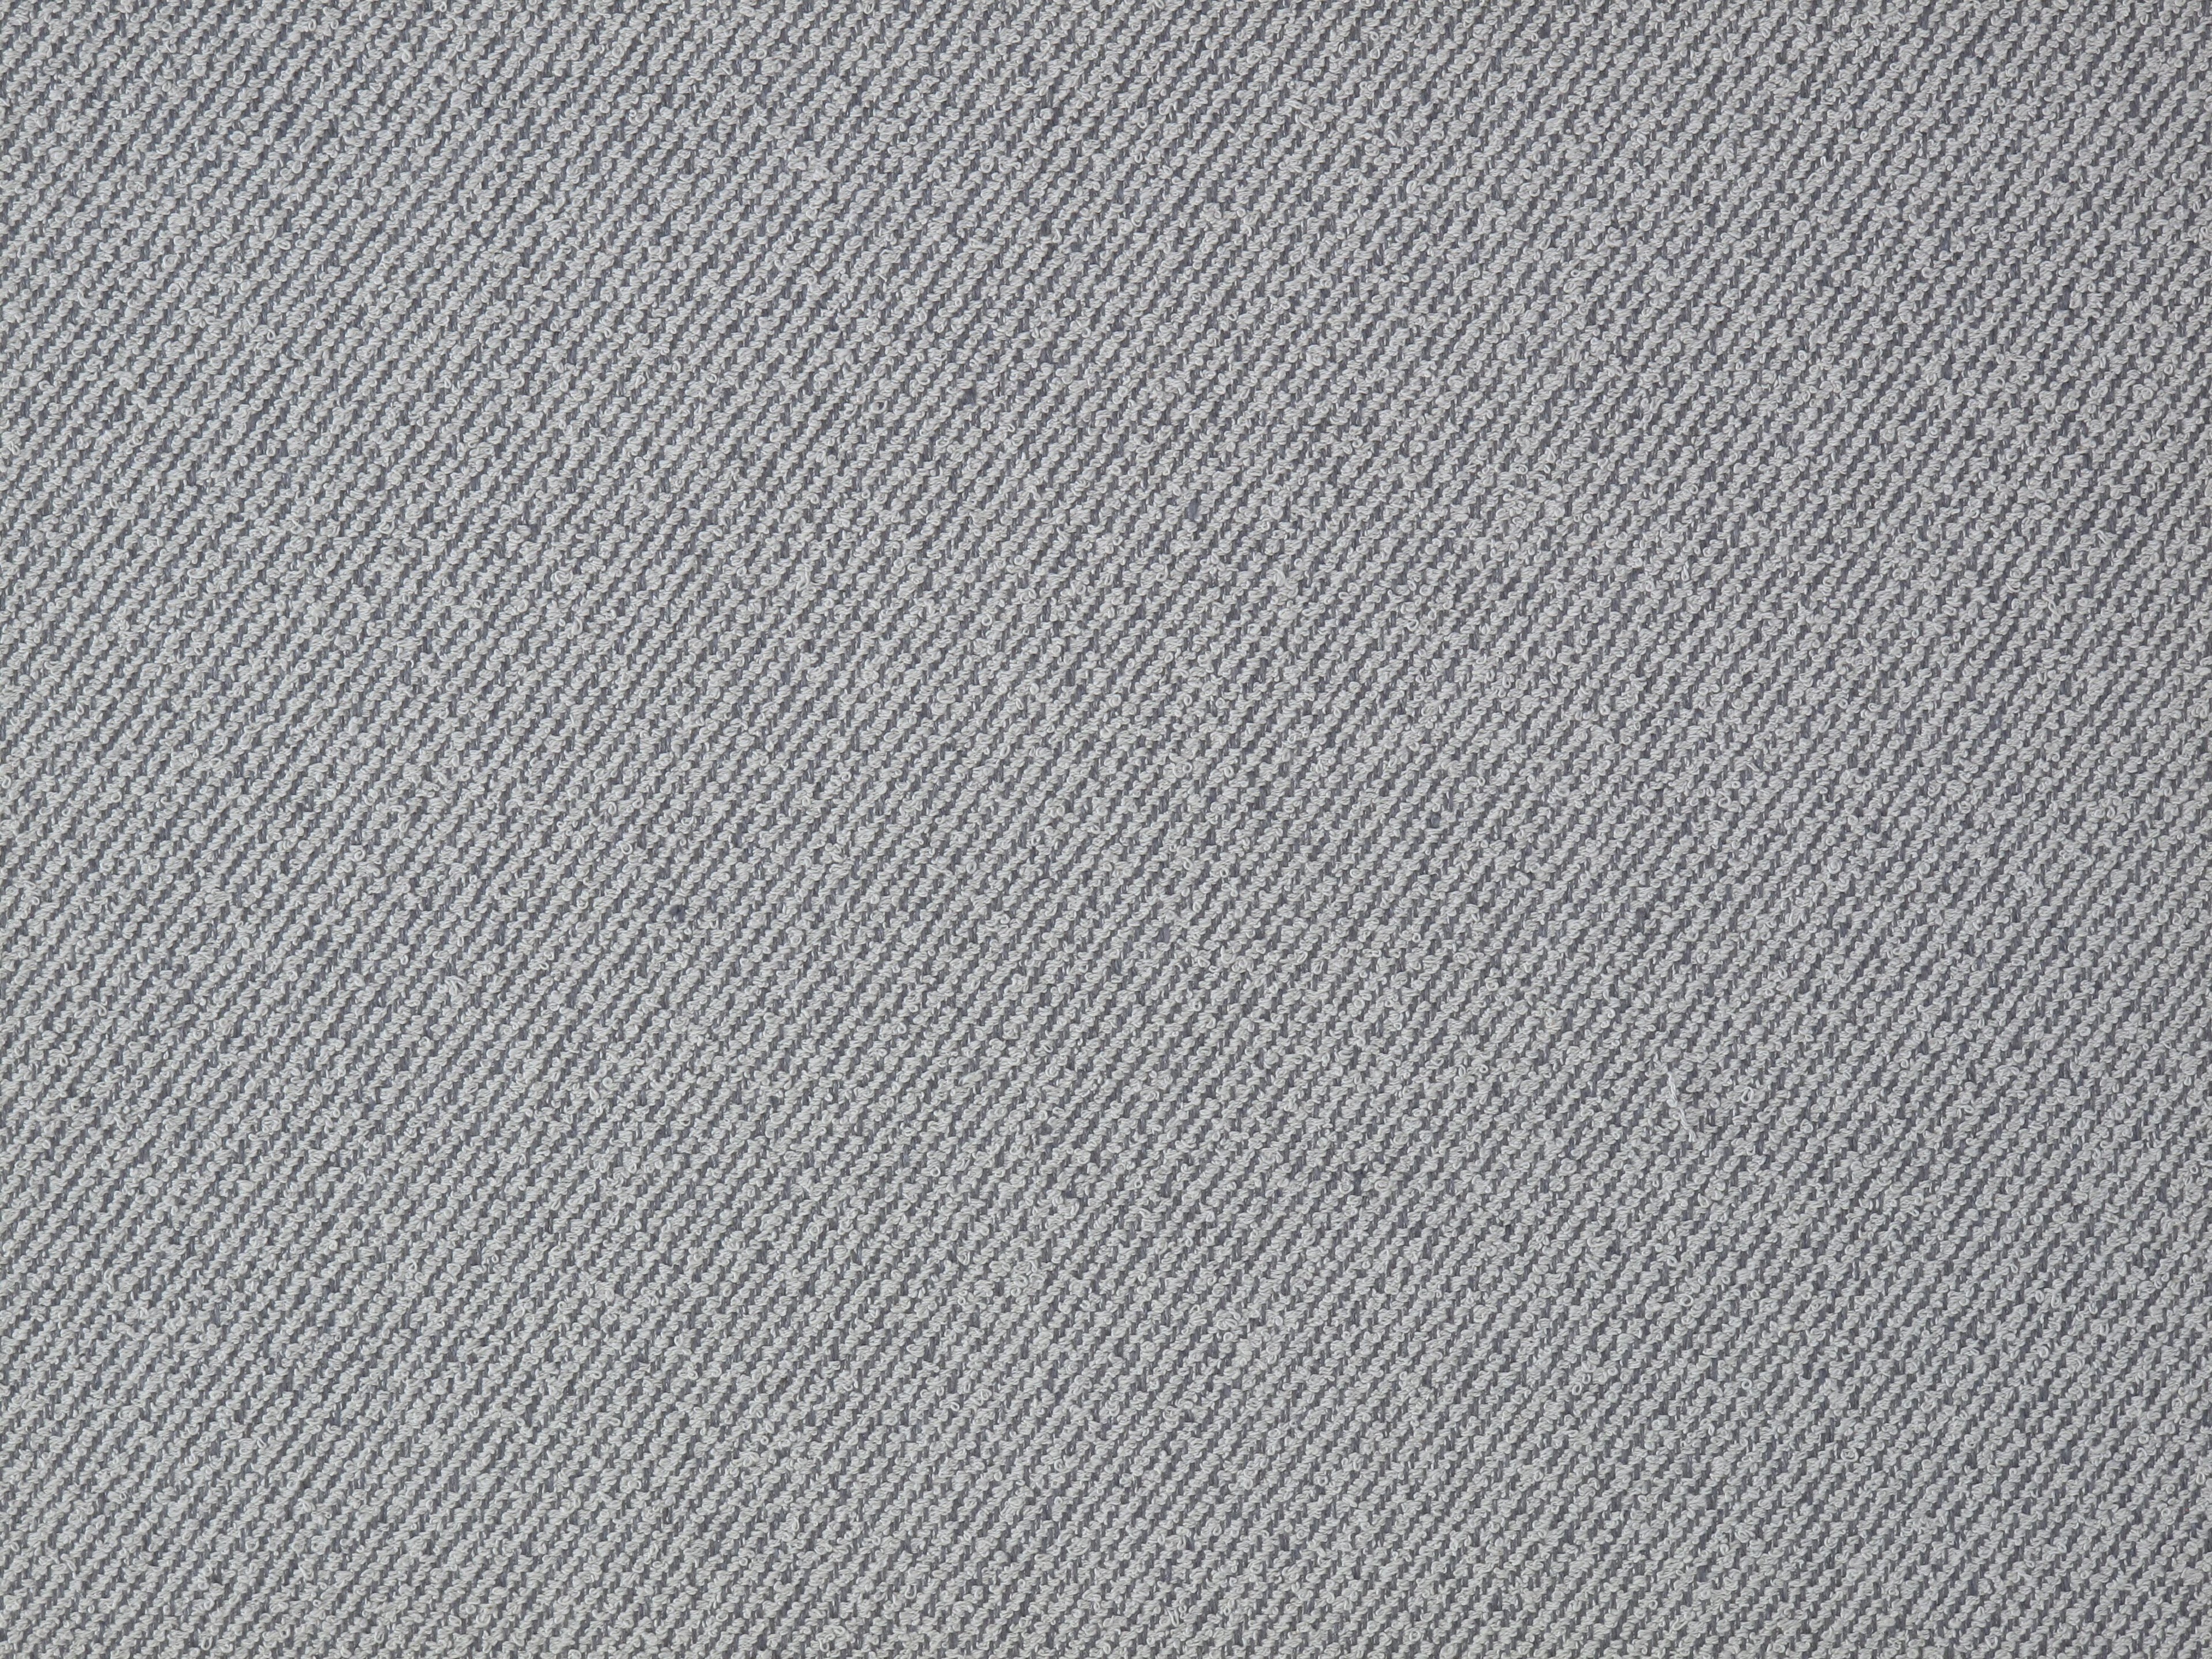 Ashford fabric in gray mist color - pattern number DI 00131451 - by Scalamandre in the Old World Weavers collection